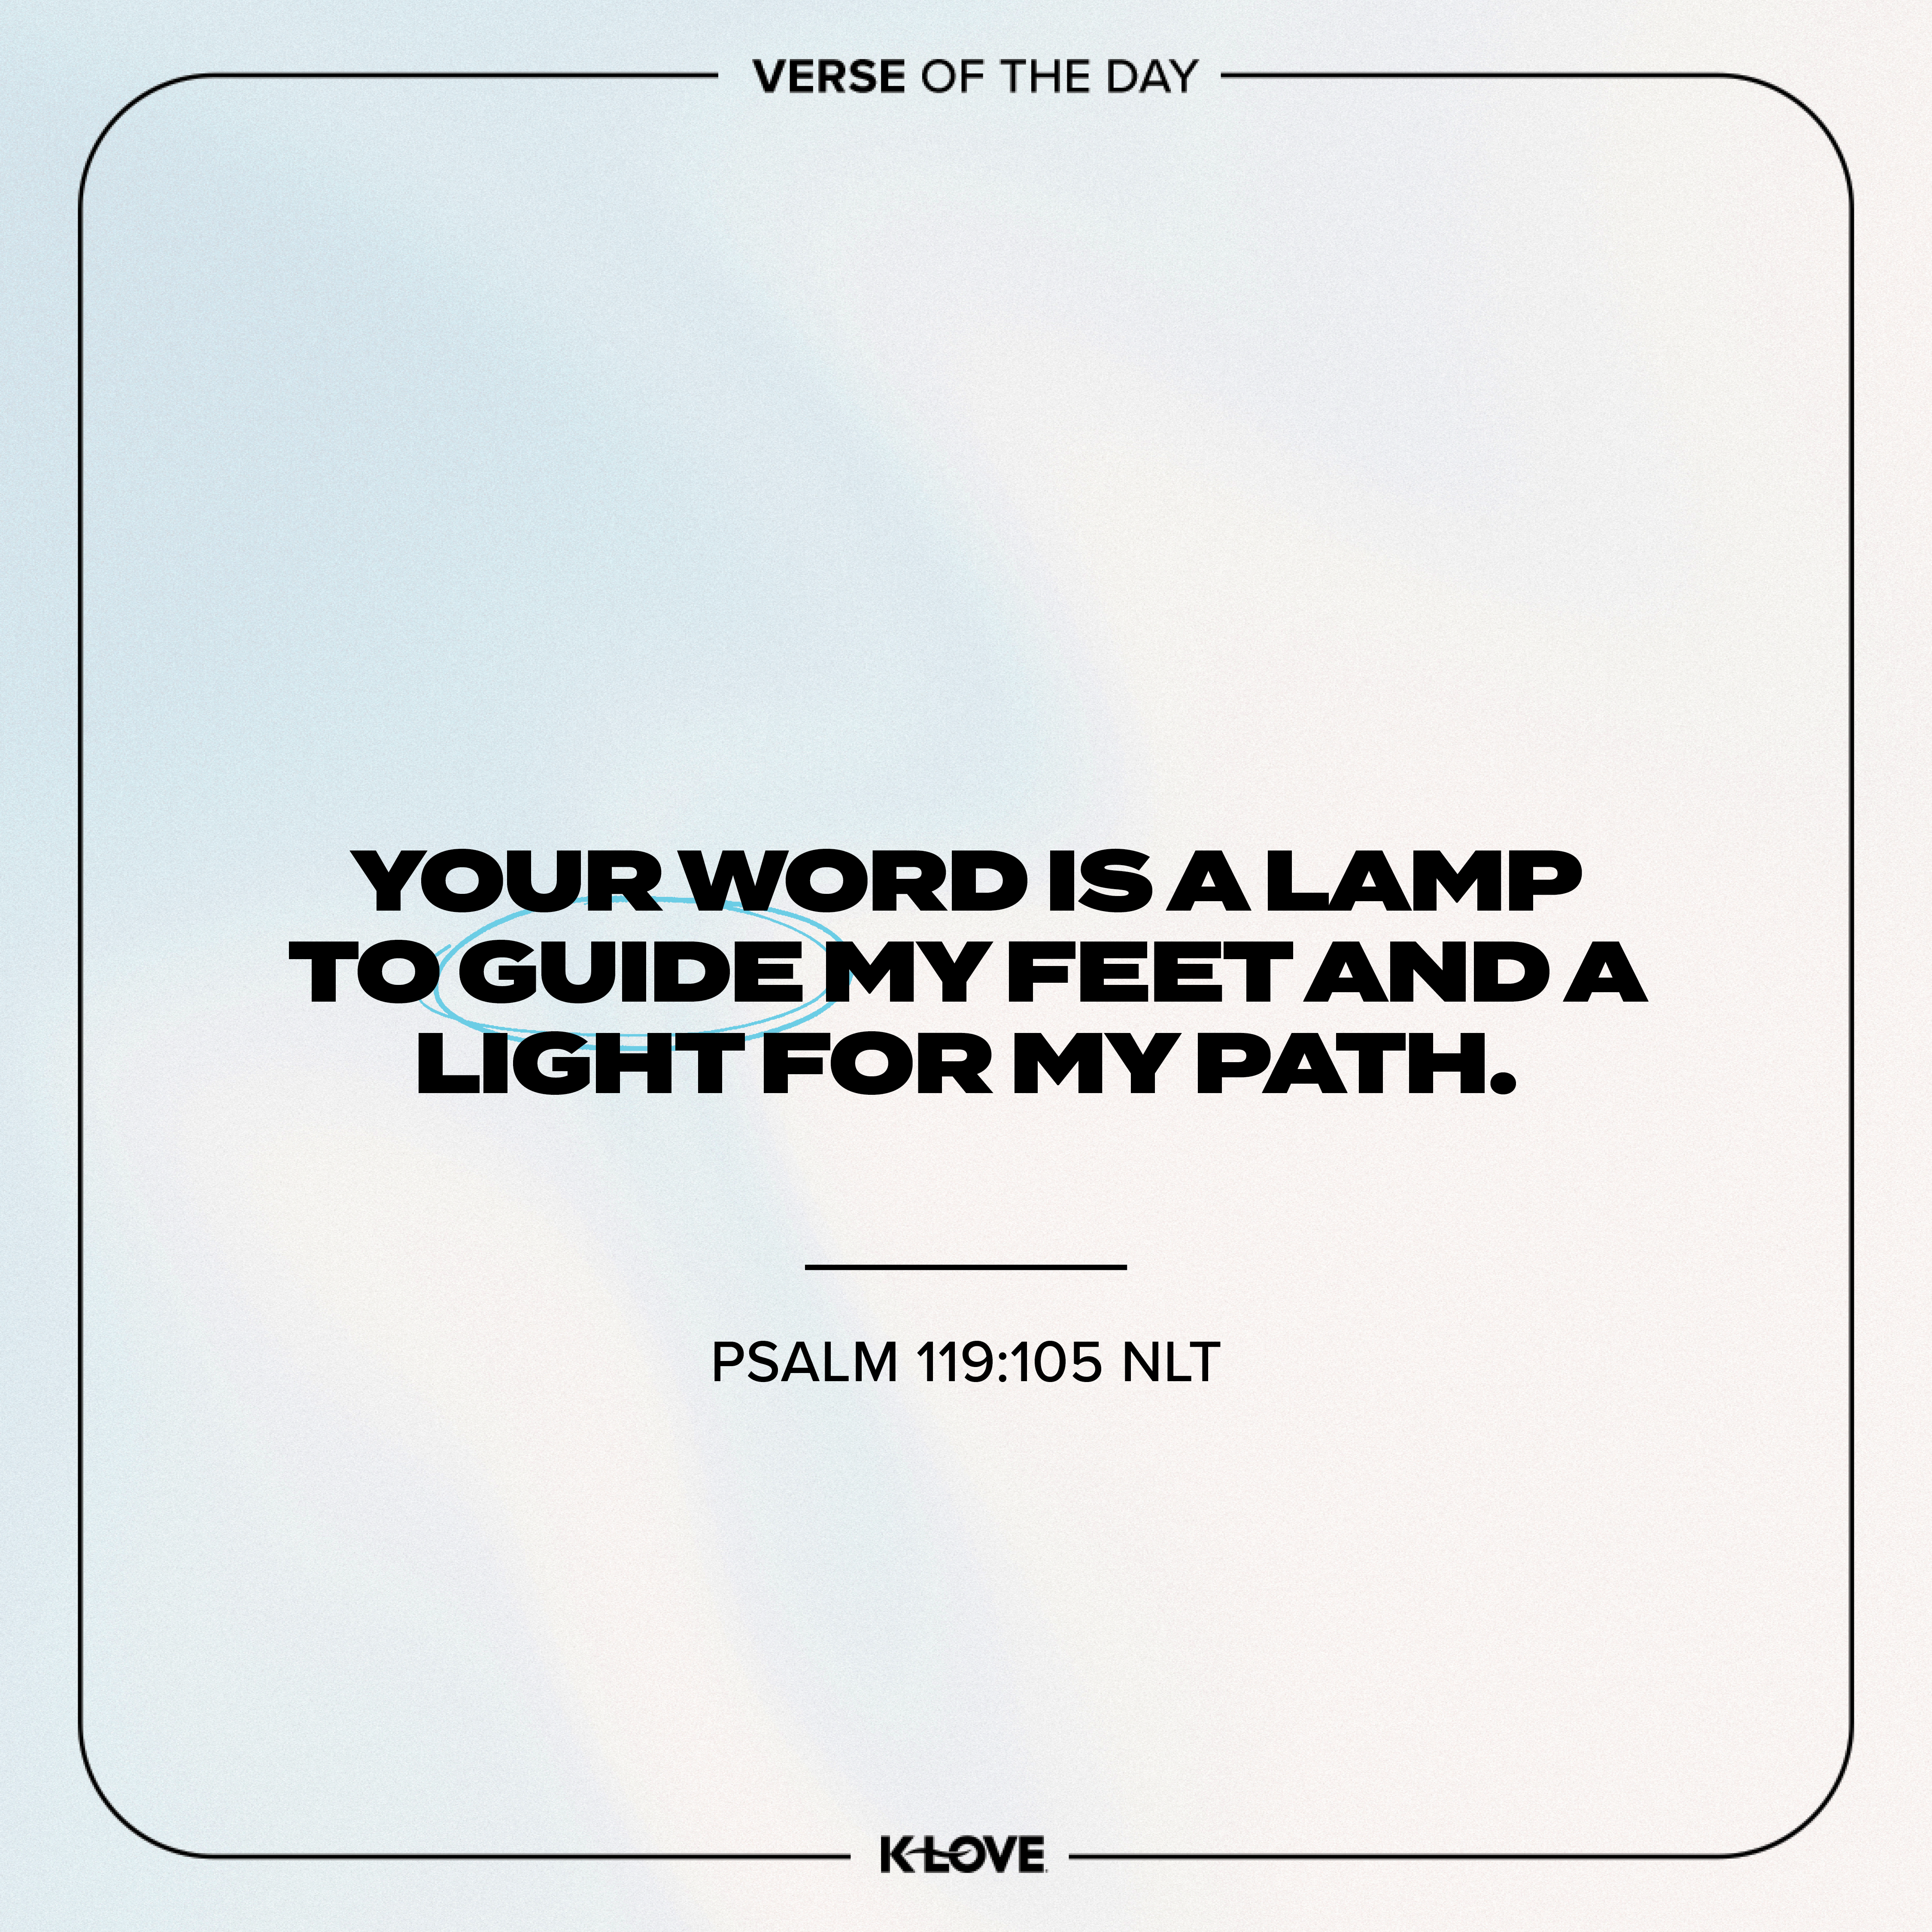 Your word is a lamp to guide my feet and a light for my path.